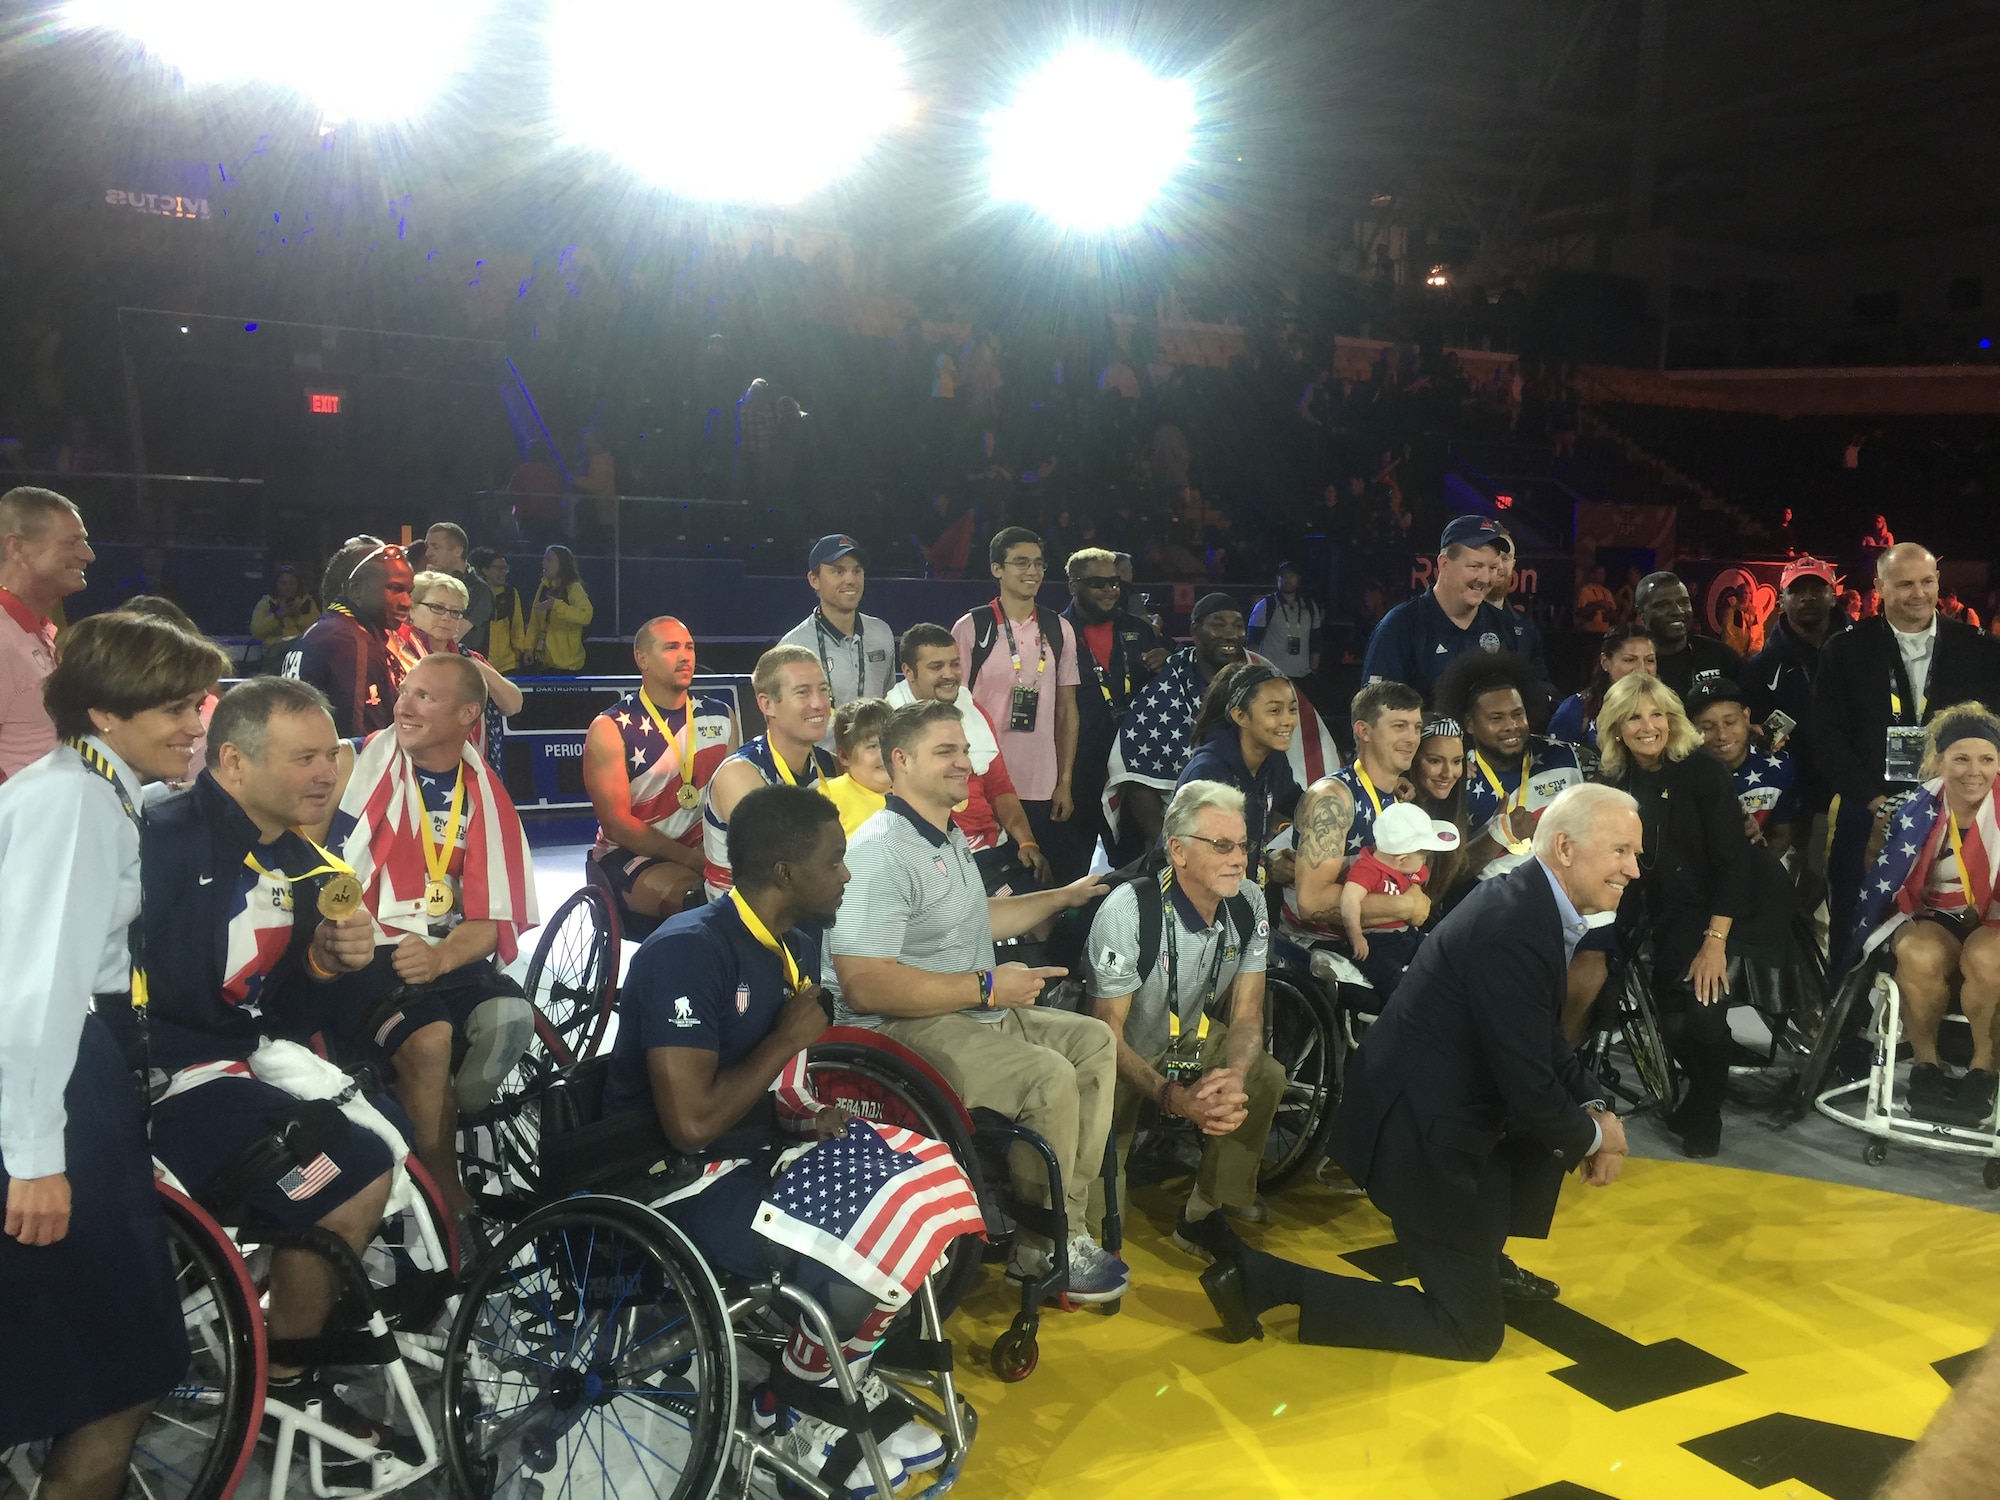 U.S. Lt. Gen. Gina Grosso (far left), Air Force Deputy Chief of Staff for Manpower and Personnel Services, stands several members of Team U.S. and Joseph Robinette "Joe" Biden Jr. (kneeling center), 47th Vice President of the United States, at the 2017 Invictus Games in Toronto, Canada, Sept. 29, 2017. The Invictus Games were established by Prince Harry of Wales in 2014, and have brought together wounded and injured veterans from 17 nations to compete across 12 adaptive sporting events. (Courtesy photo)